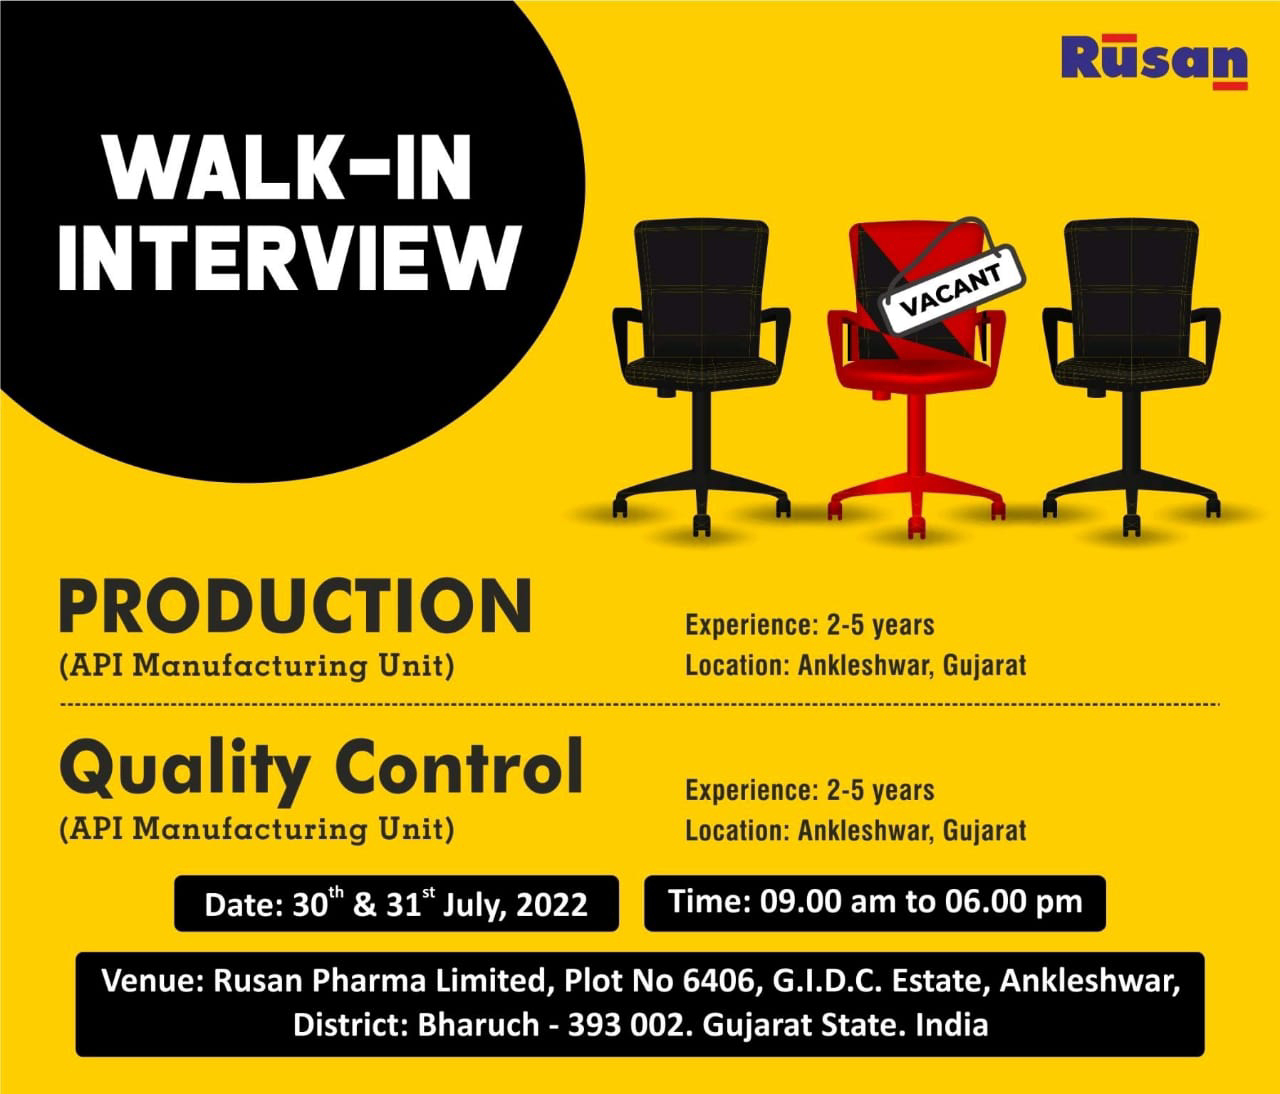 Job Available's for Rusan Pharma Ltd Walk-In Interview for QC/ Production